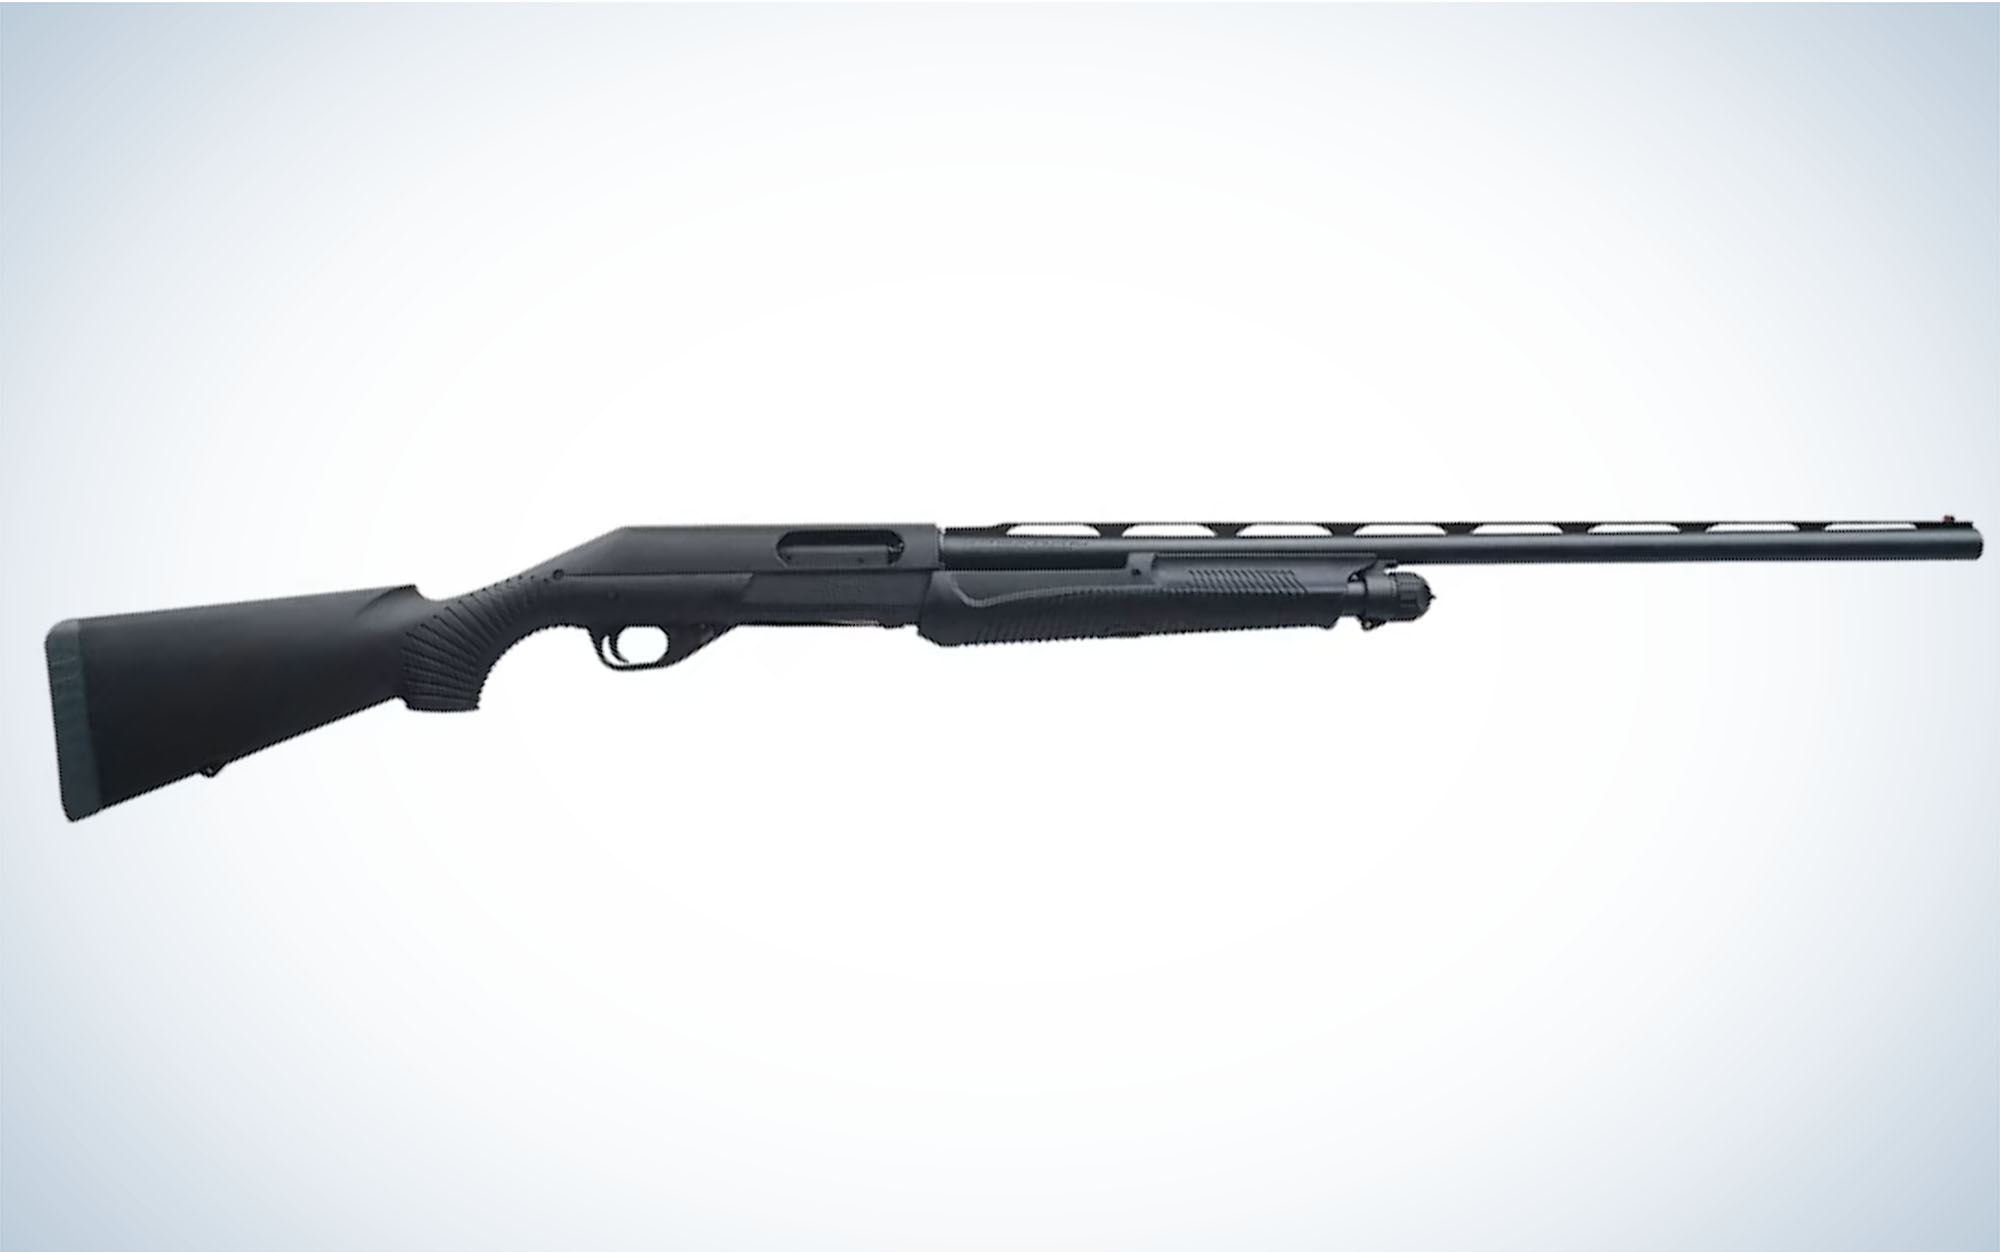 The Benelli Nova could replace the Remington 870.